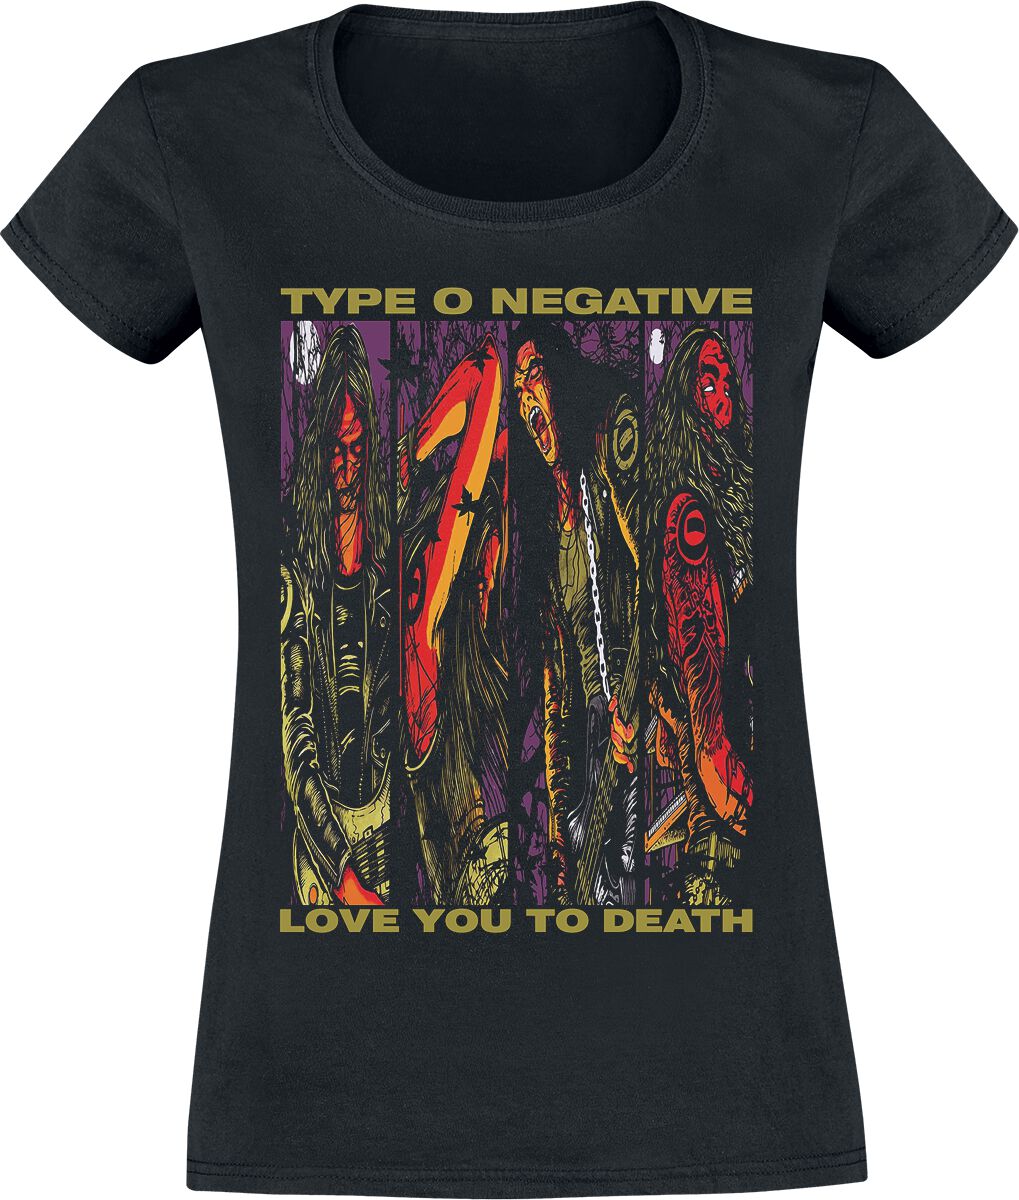 Image of Type O Negative Love You To Death Girl-Shirt schwarz